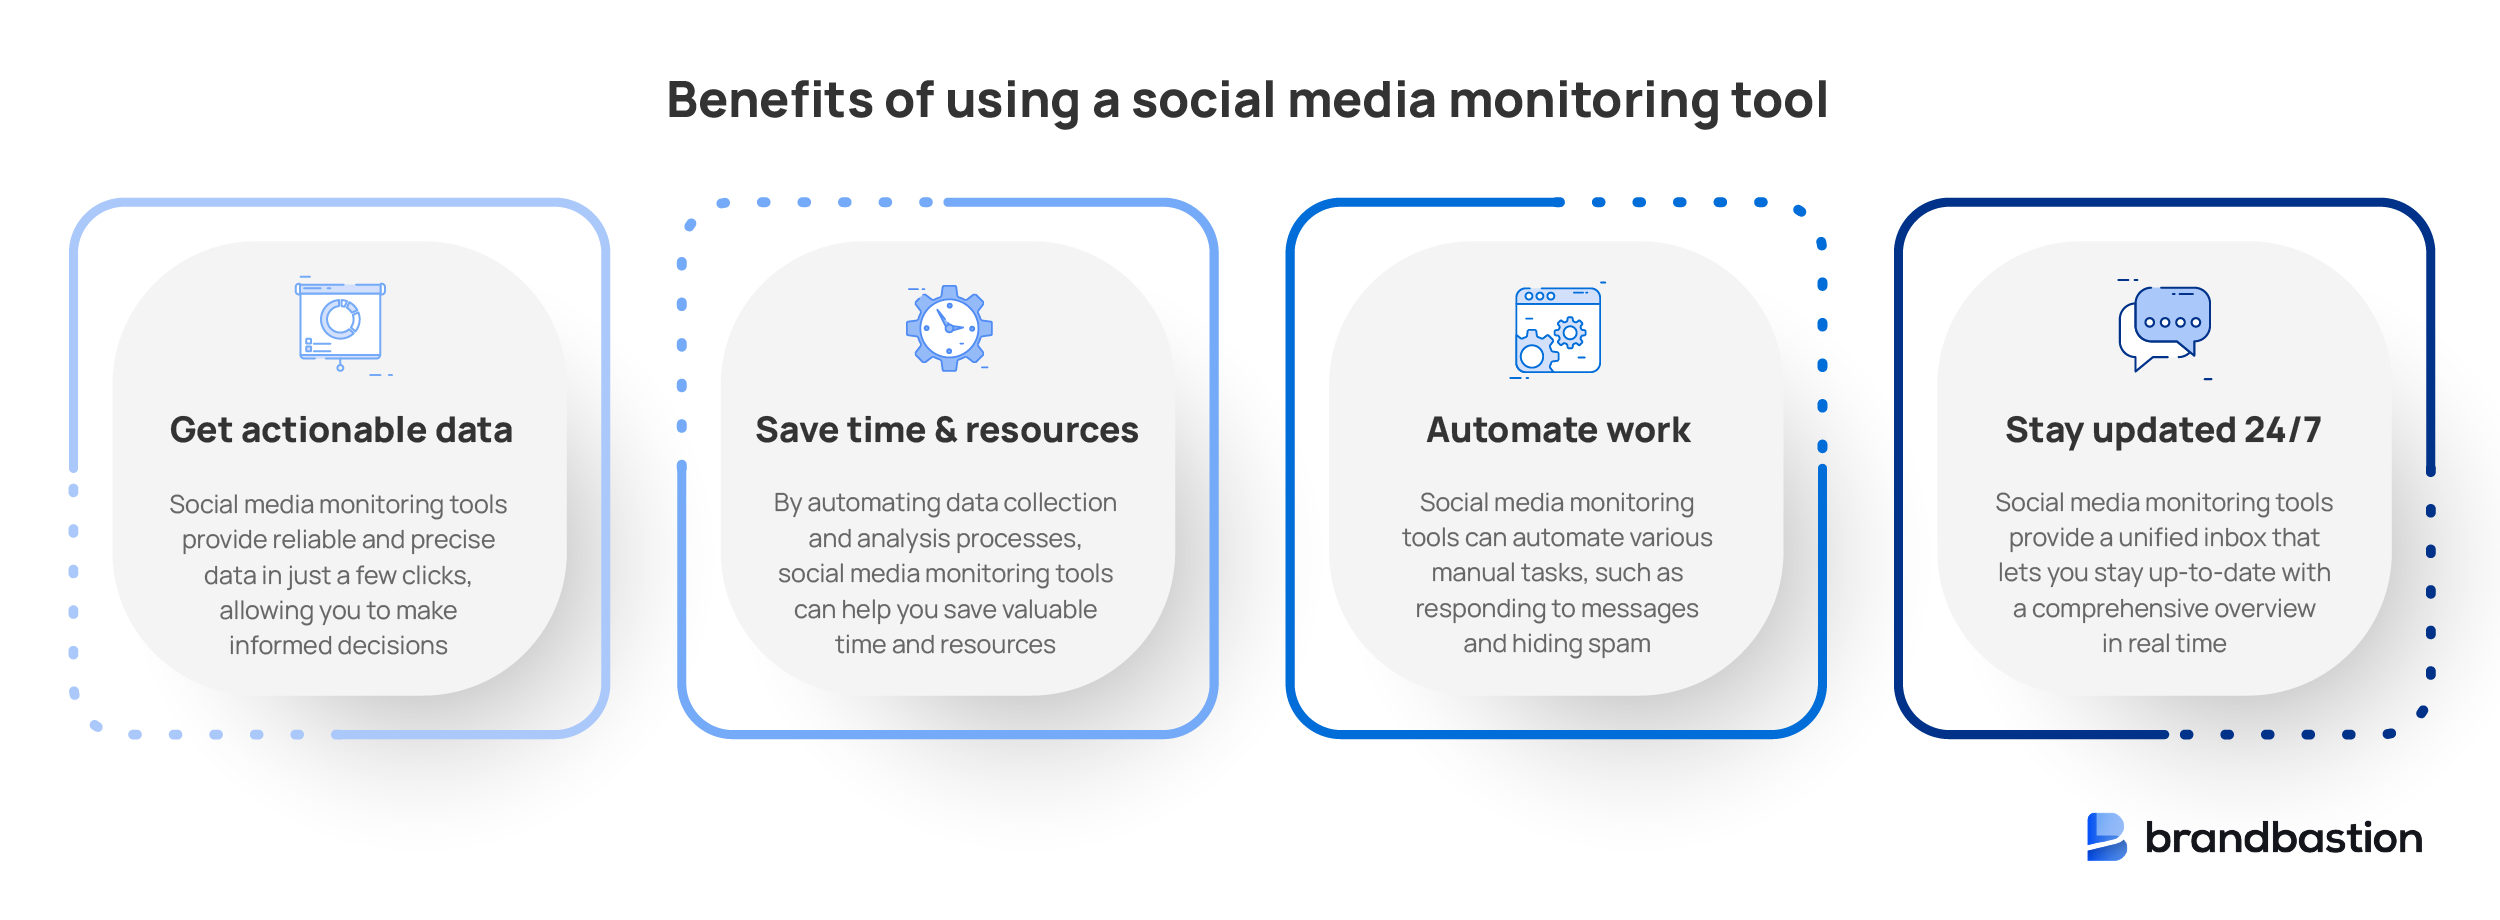 7 Top Social Media Monitoring Tools and Why You Need Them